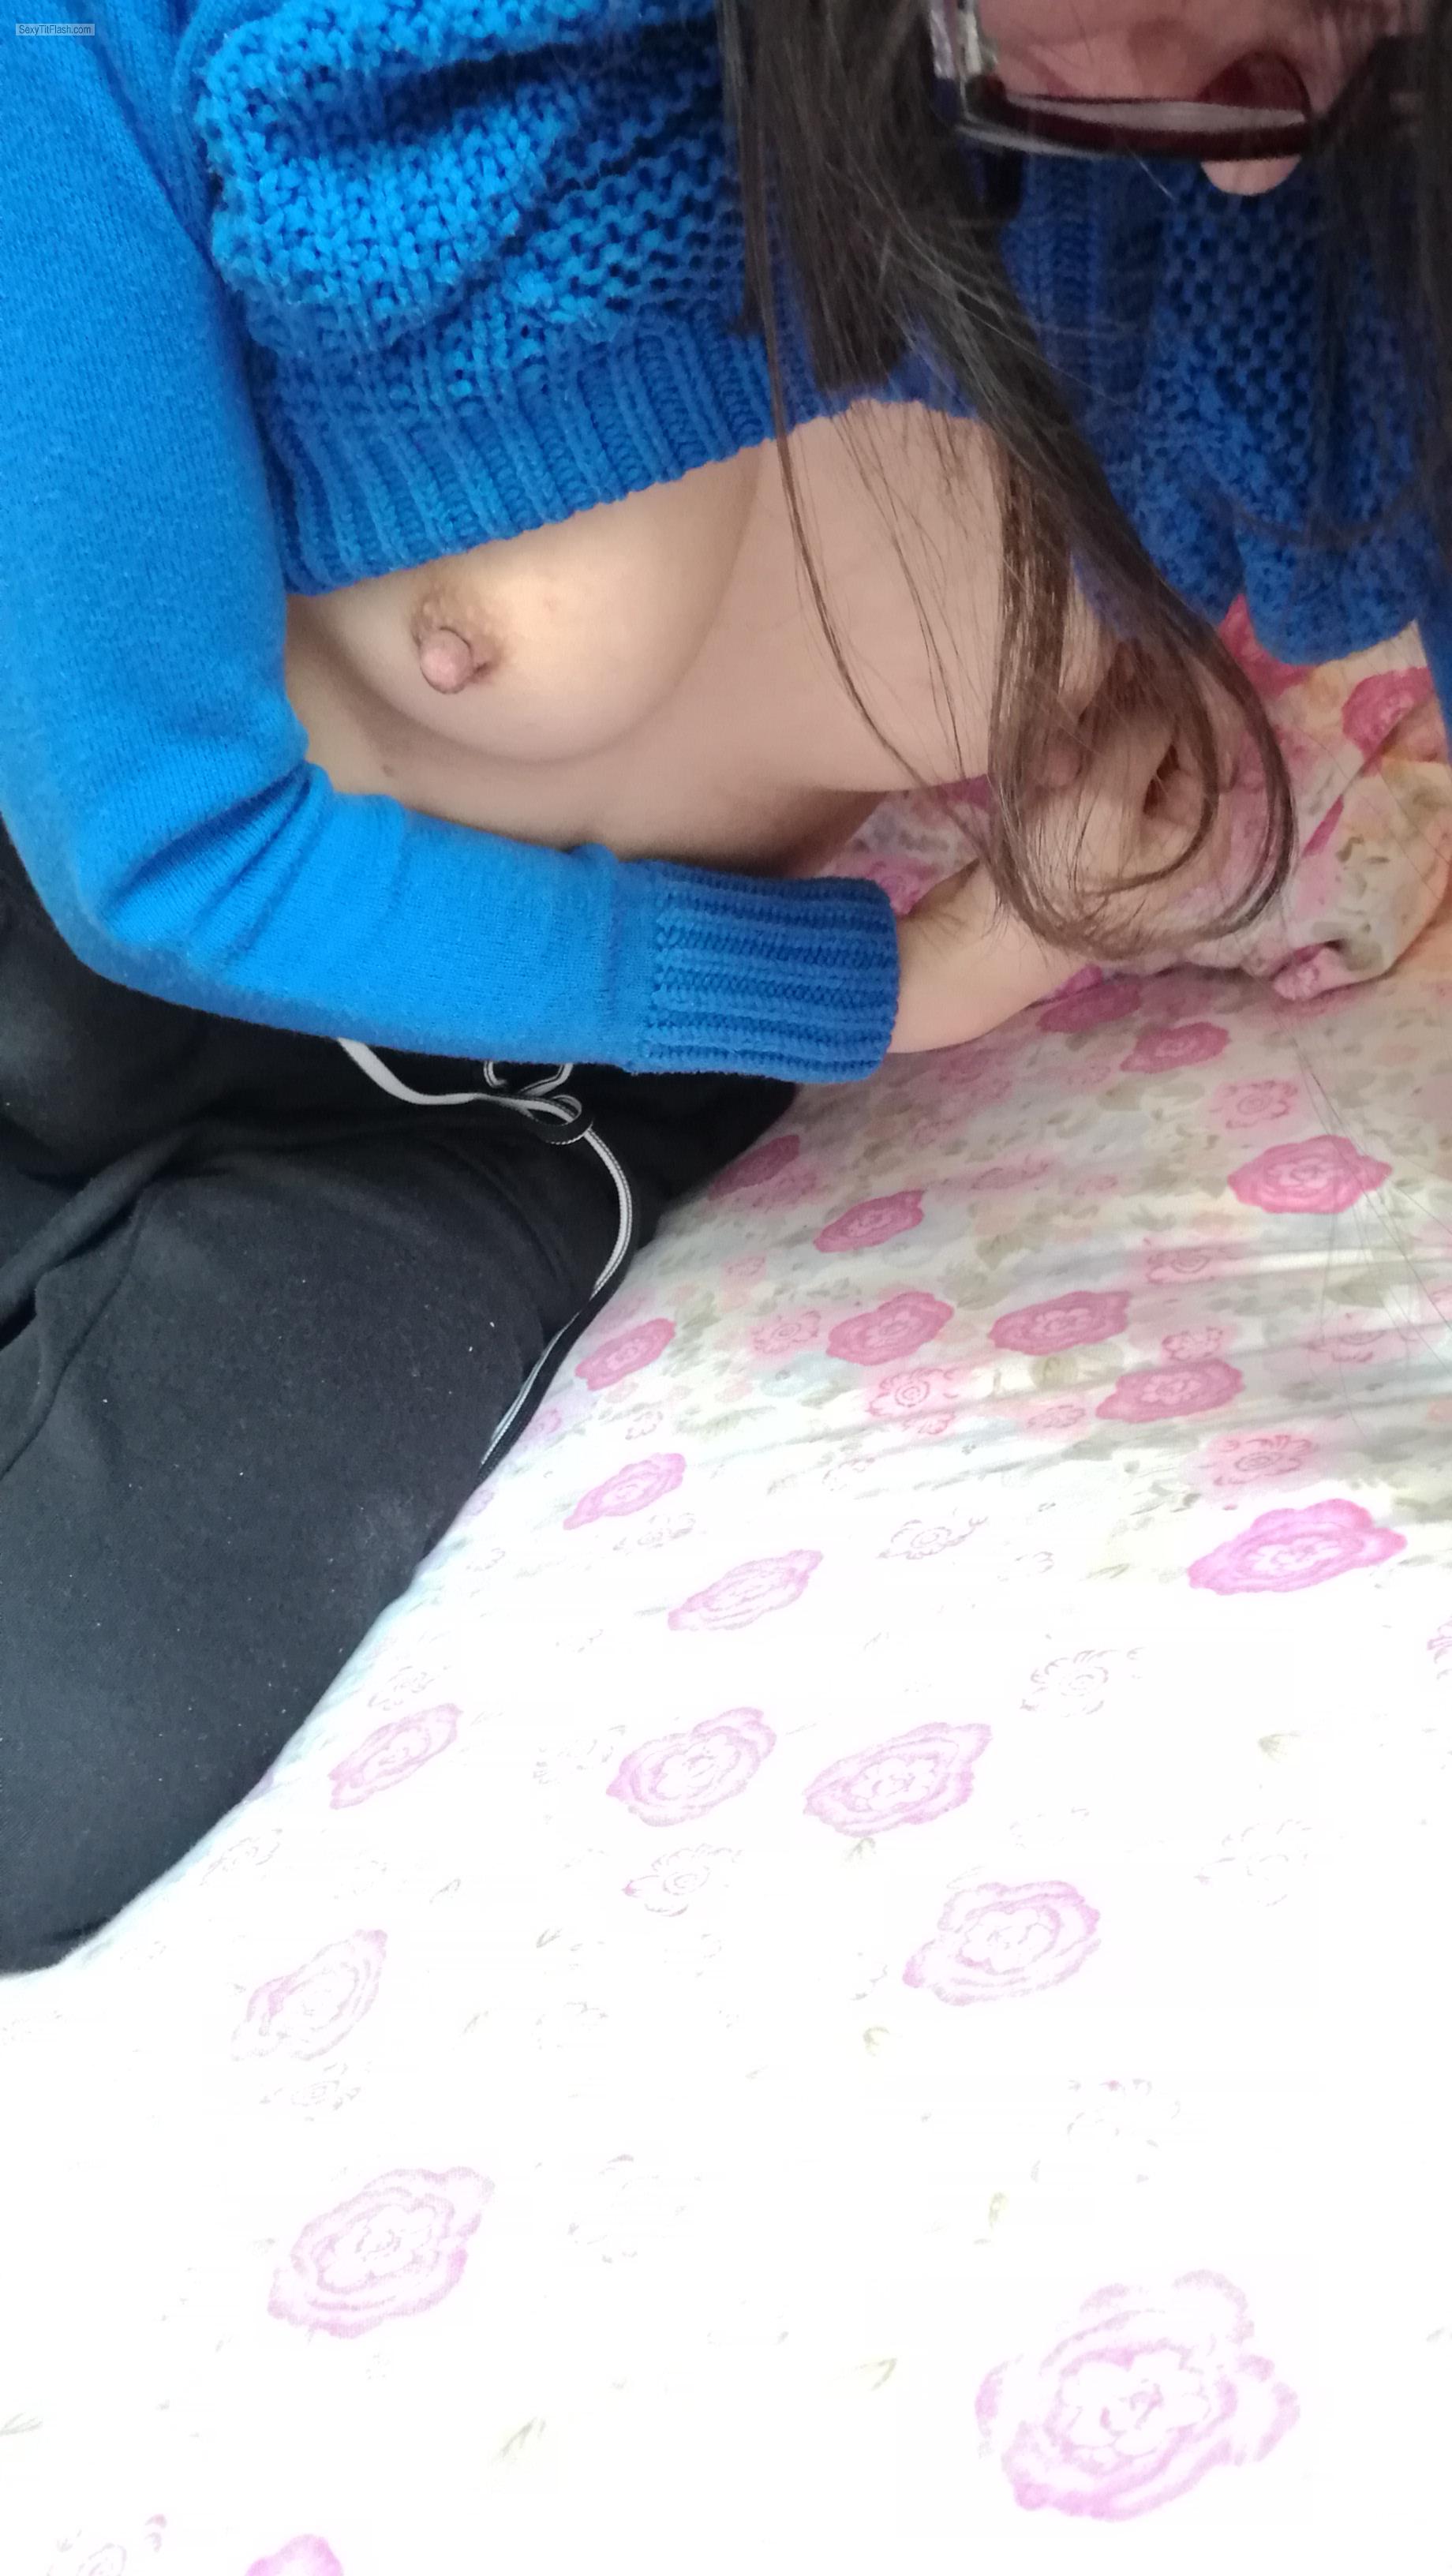 Tit Flash: Wife's Small Tits (Selfie) - Huntw from China